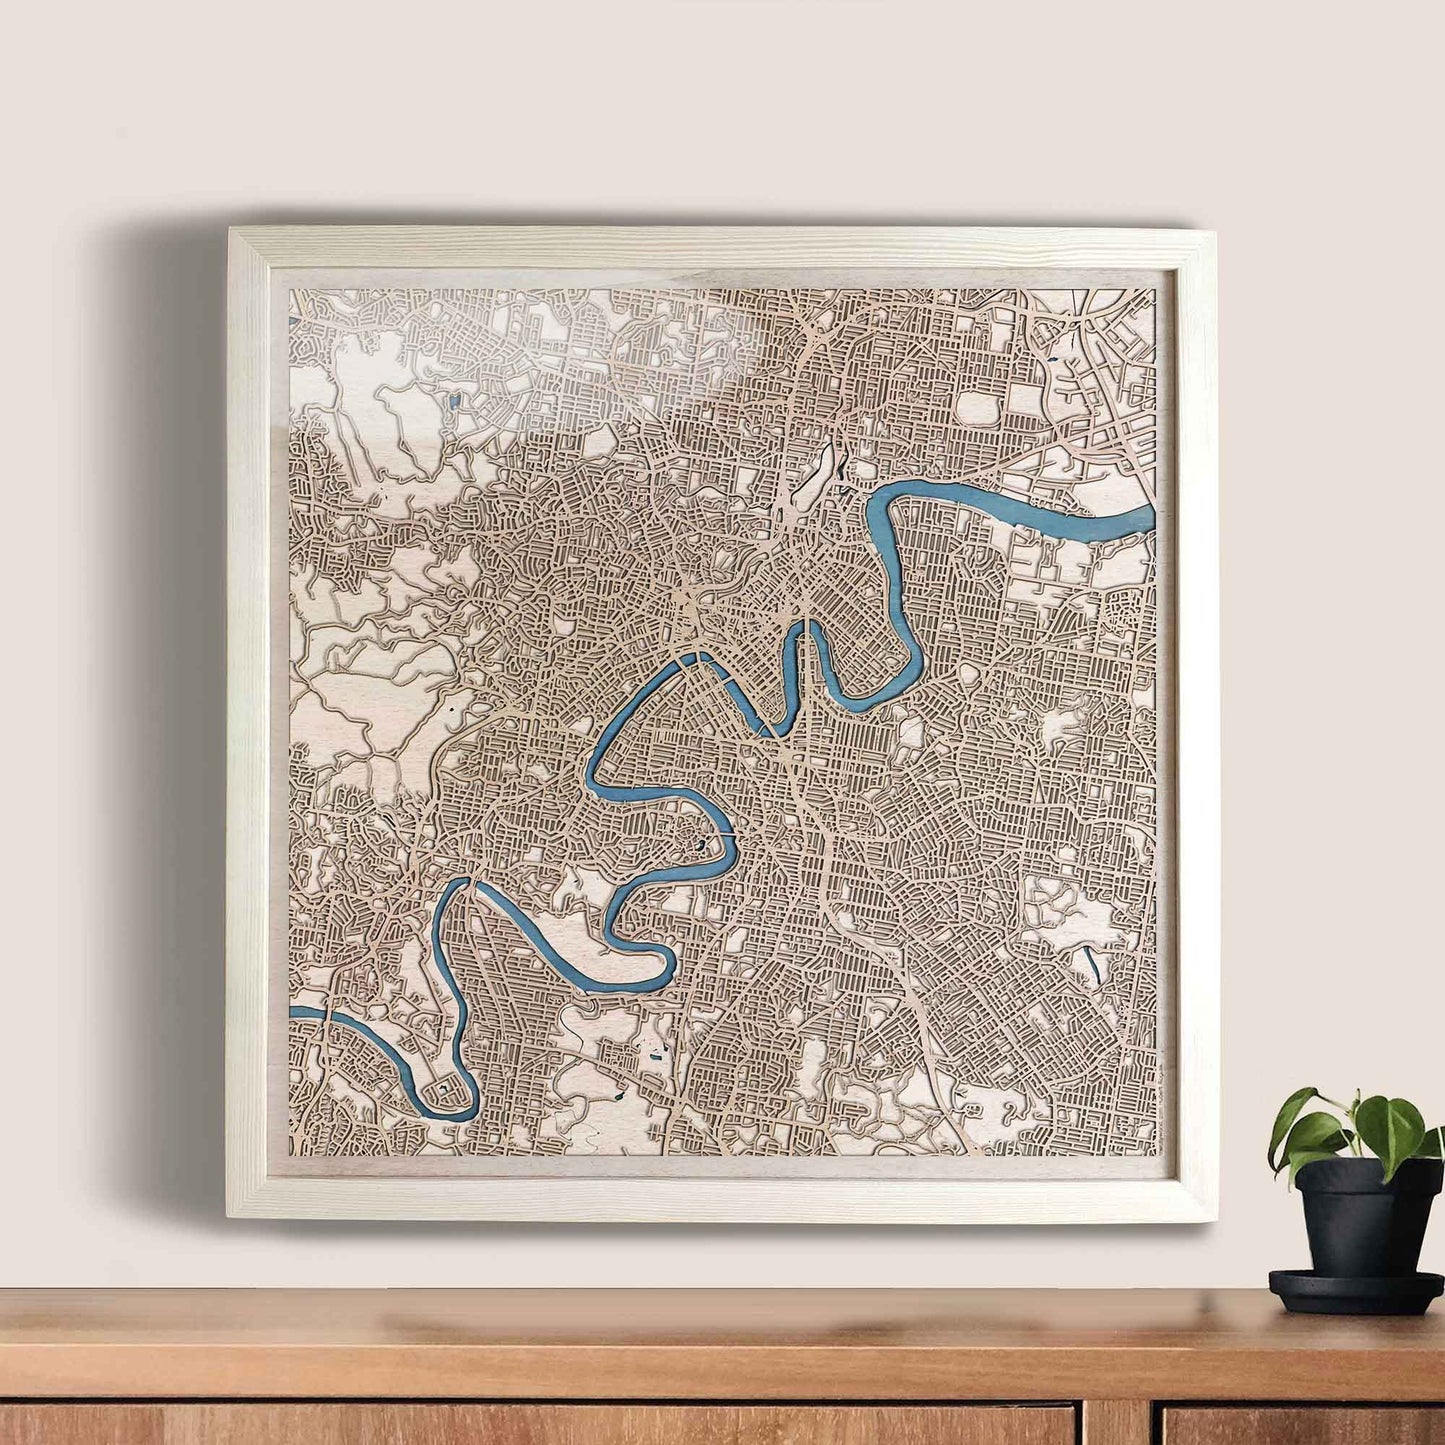 Brisbane Wooden Map by CityWood - Custom Wood Map Art - Unique Laser Cut Engraved - Anniversary Gift